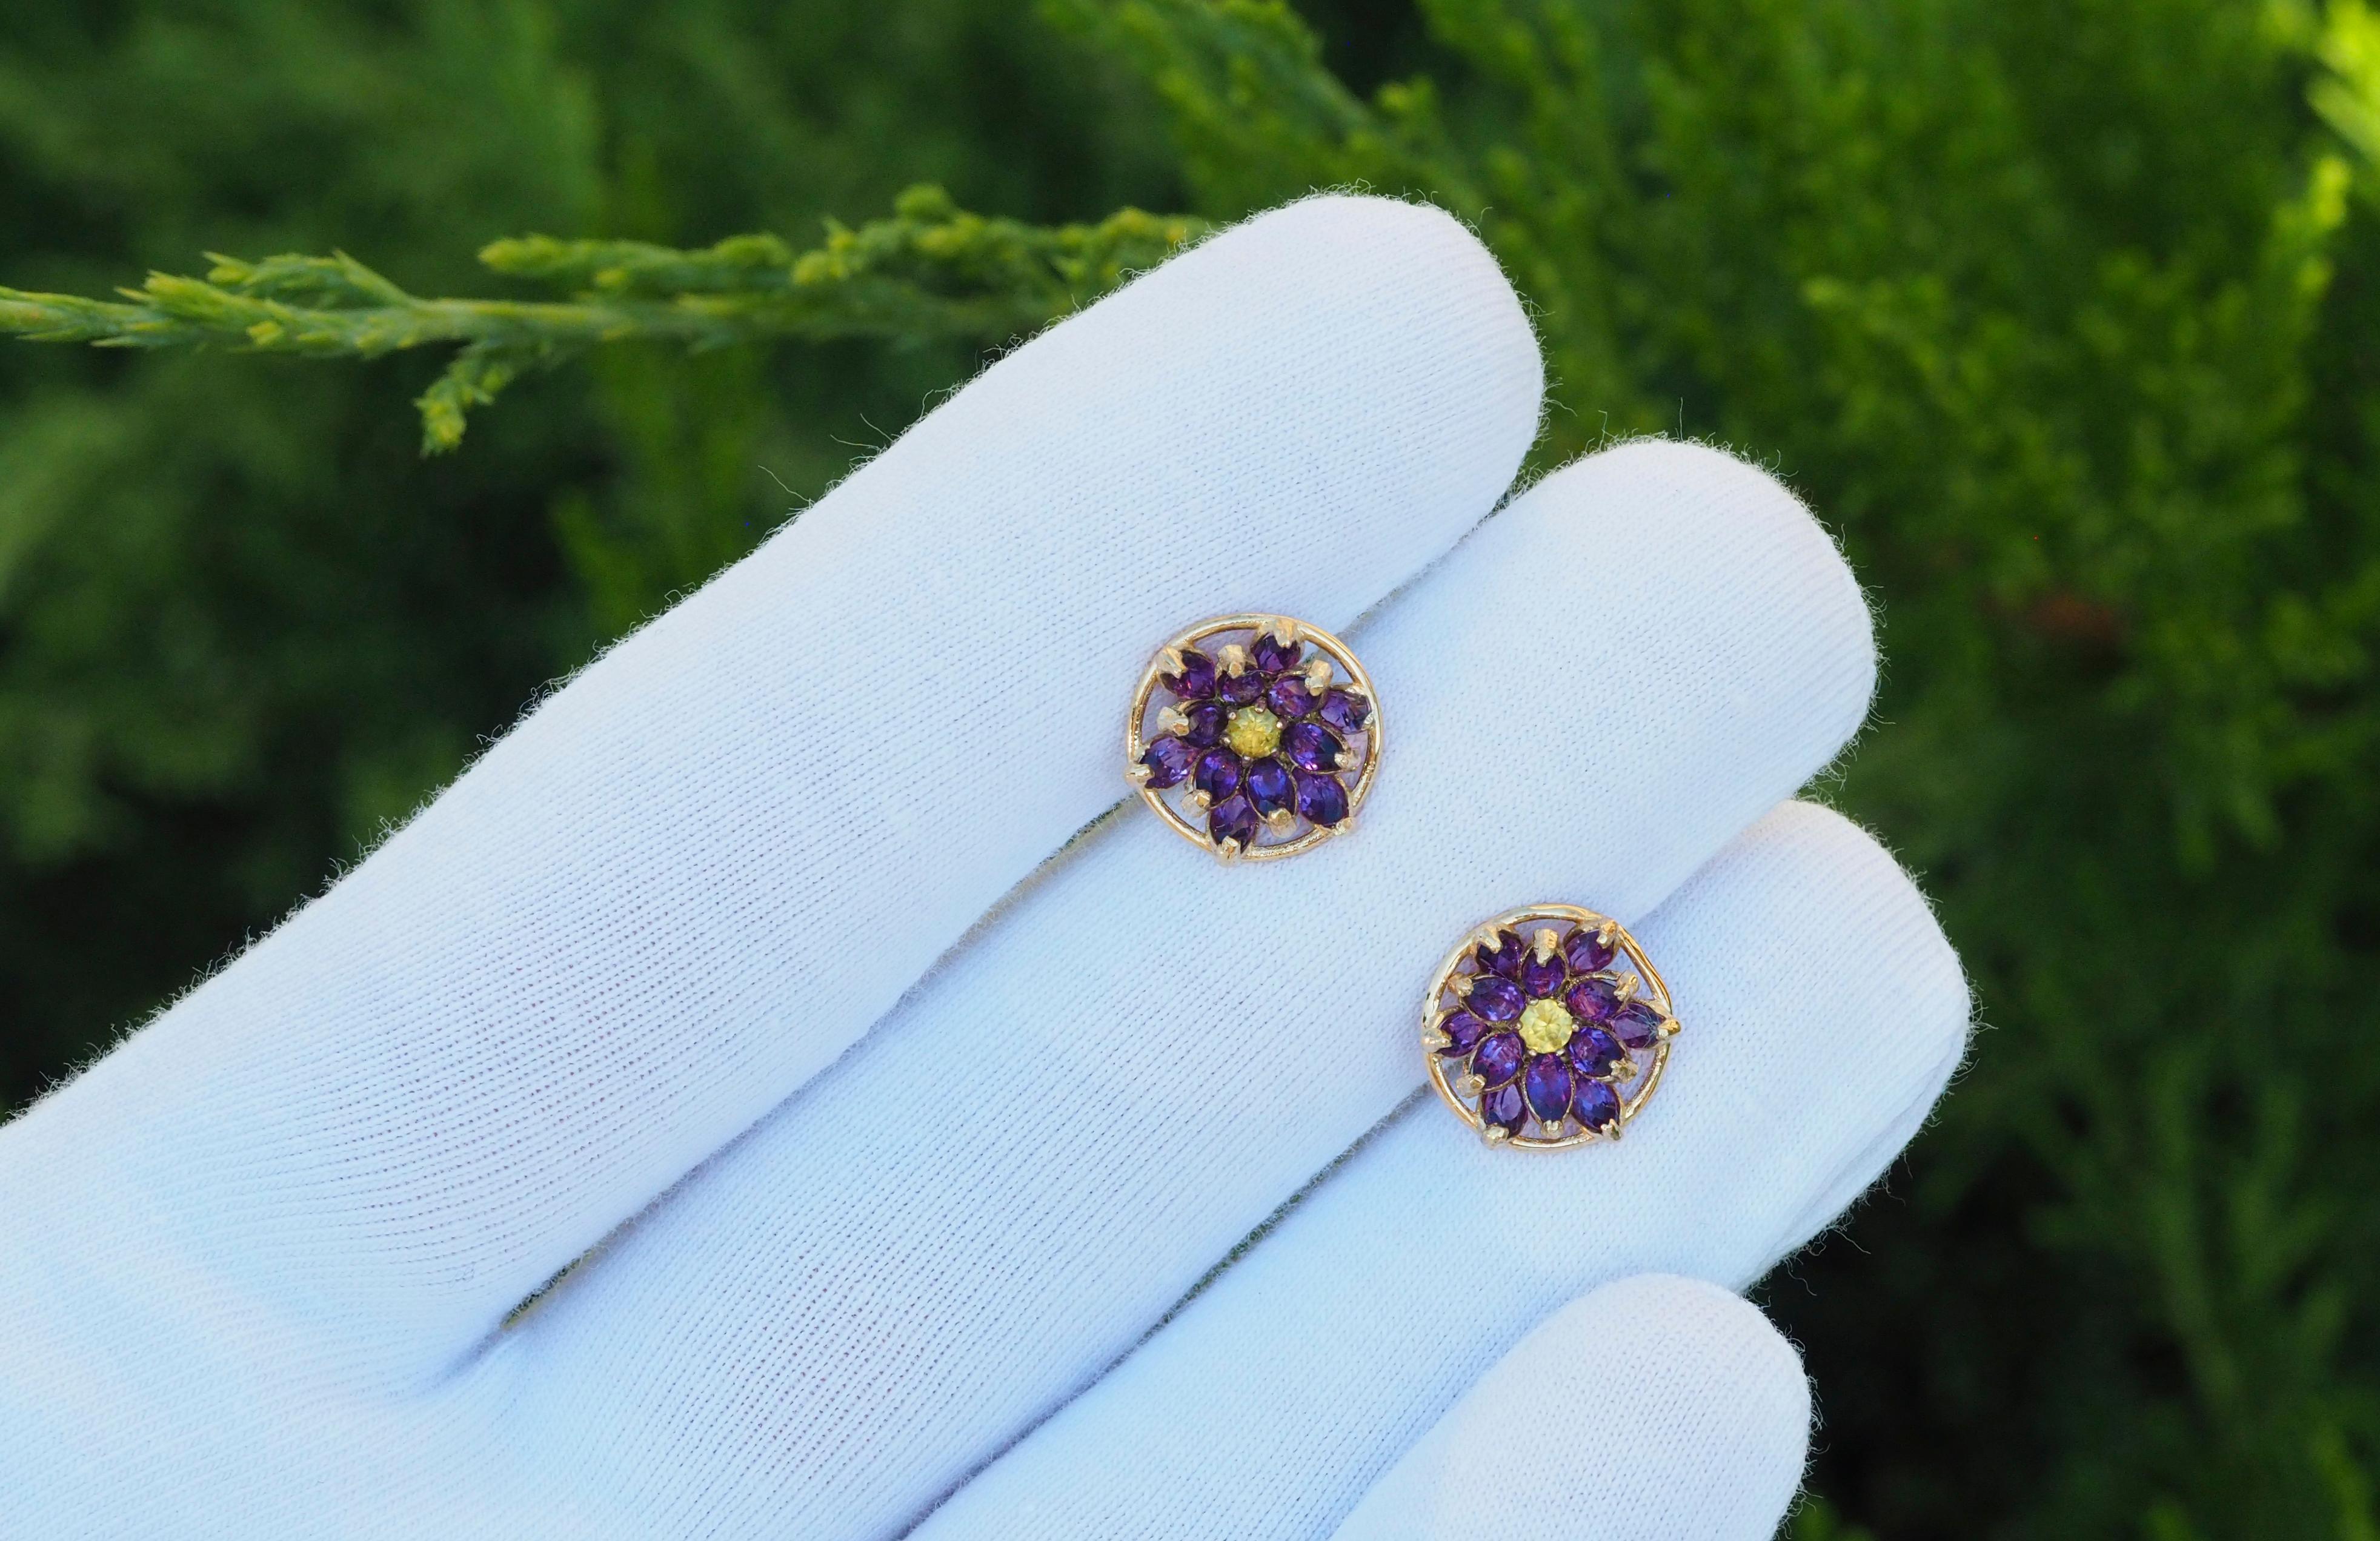 Marquise Cut Lotus Flower Earrings Studs in 14k Gold, Amethyst and Sapphires Earrings For Sale